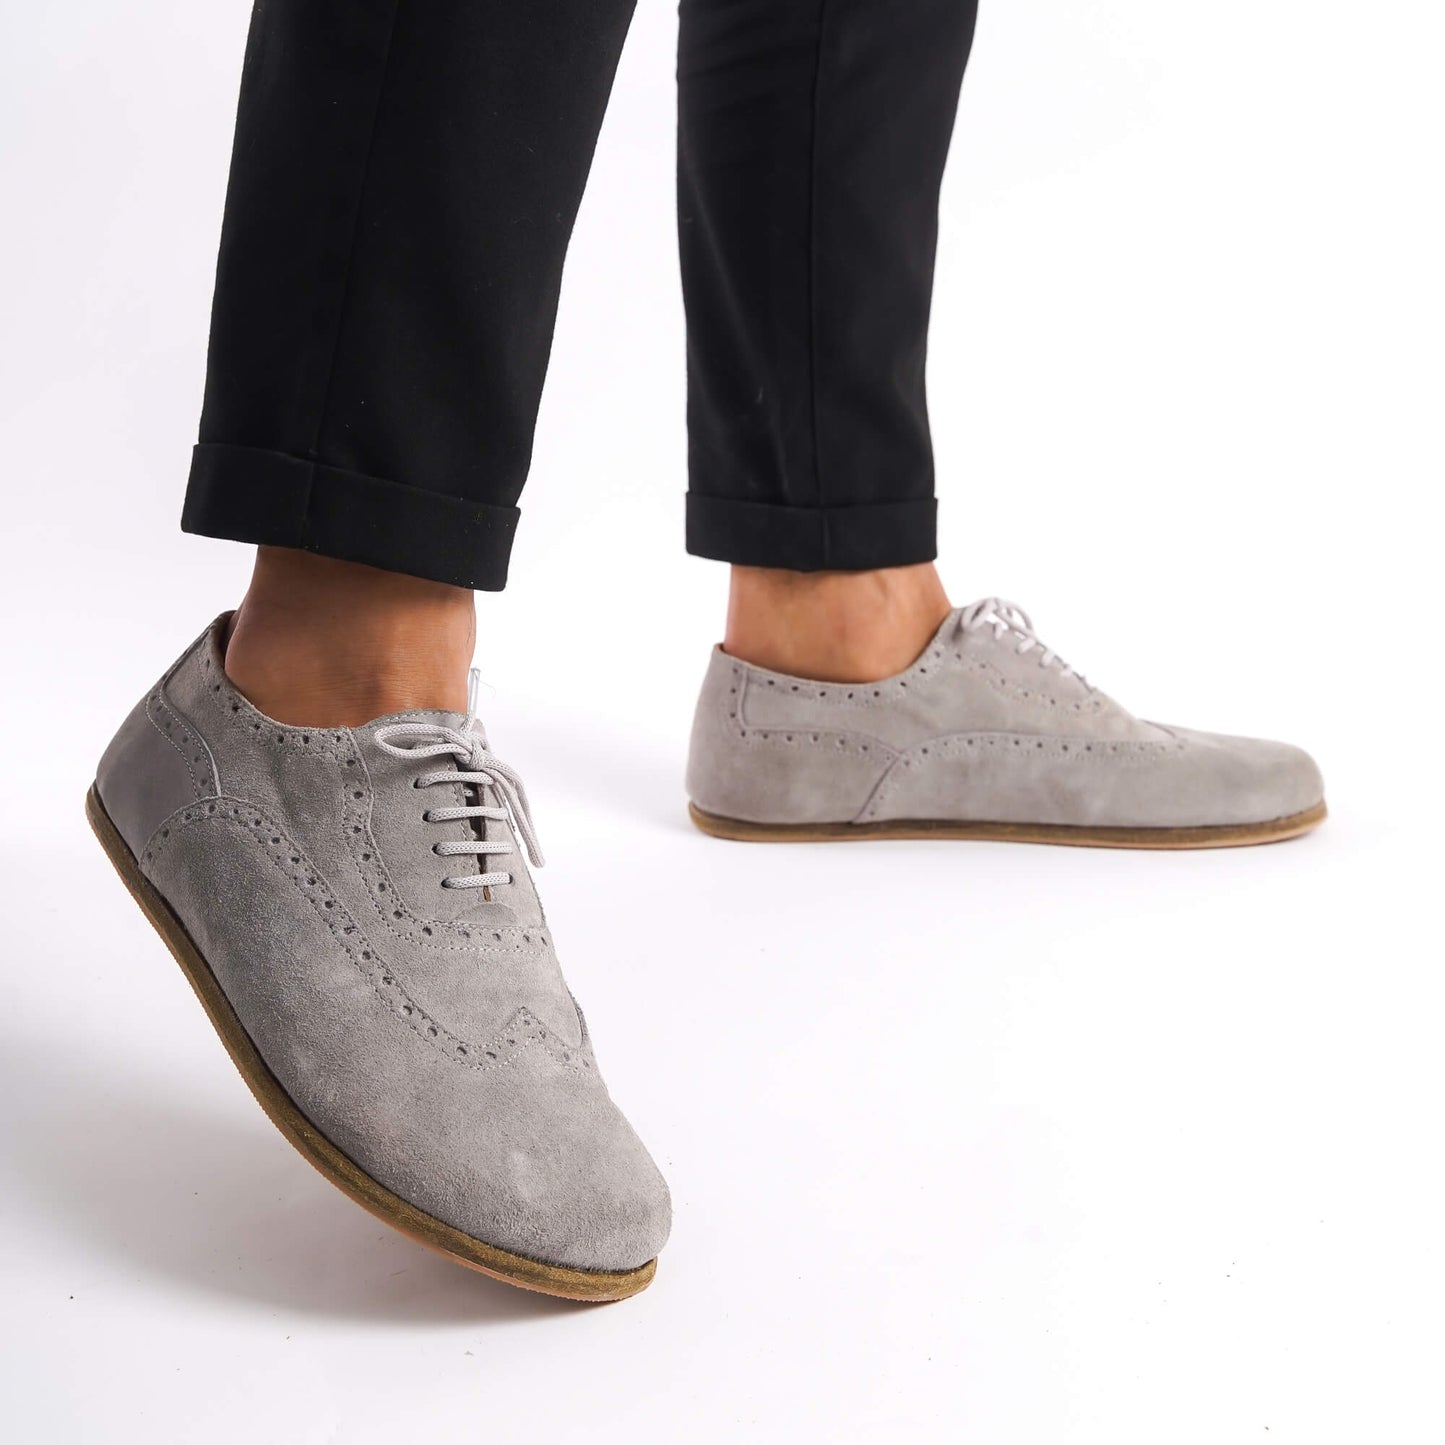 Gray suede barefoot Oxfords on a man, demonstrating the natural fit and comfort of the shoes.